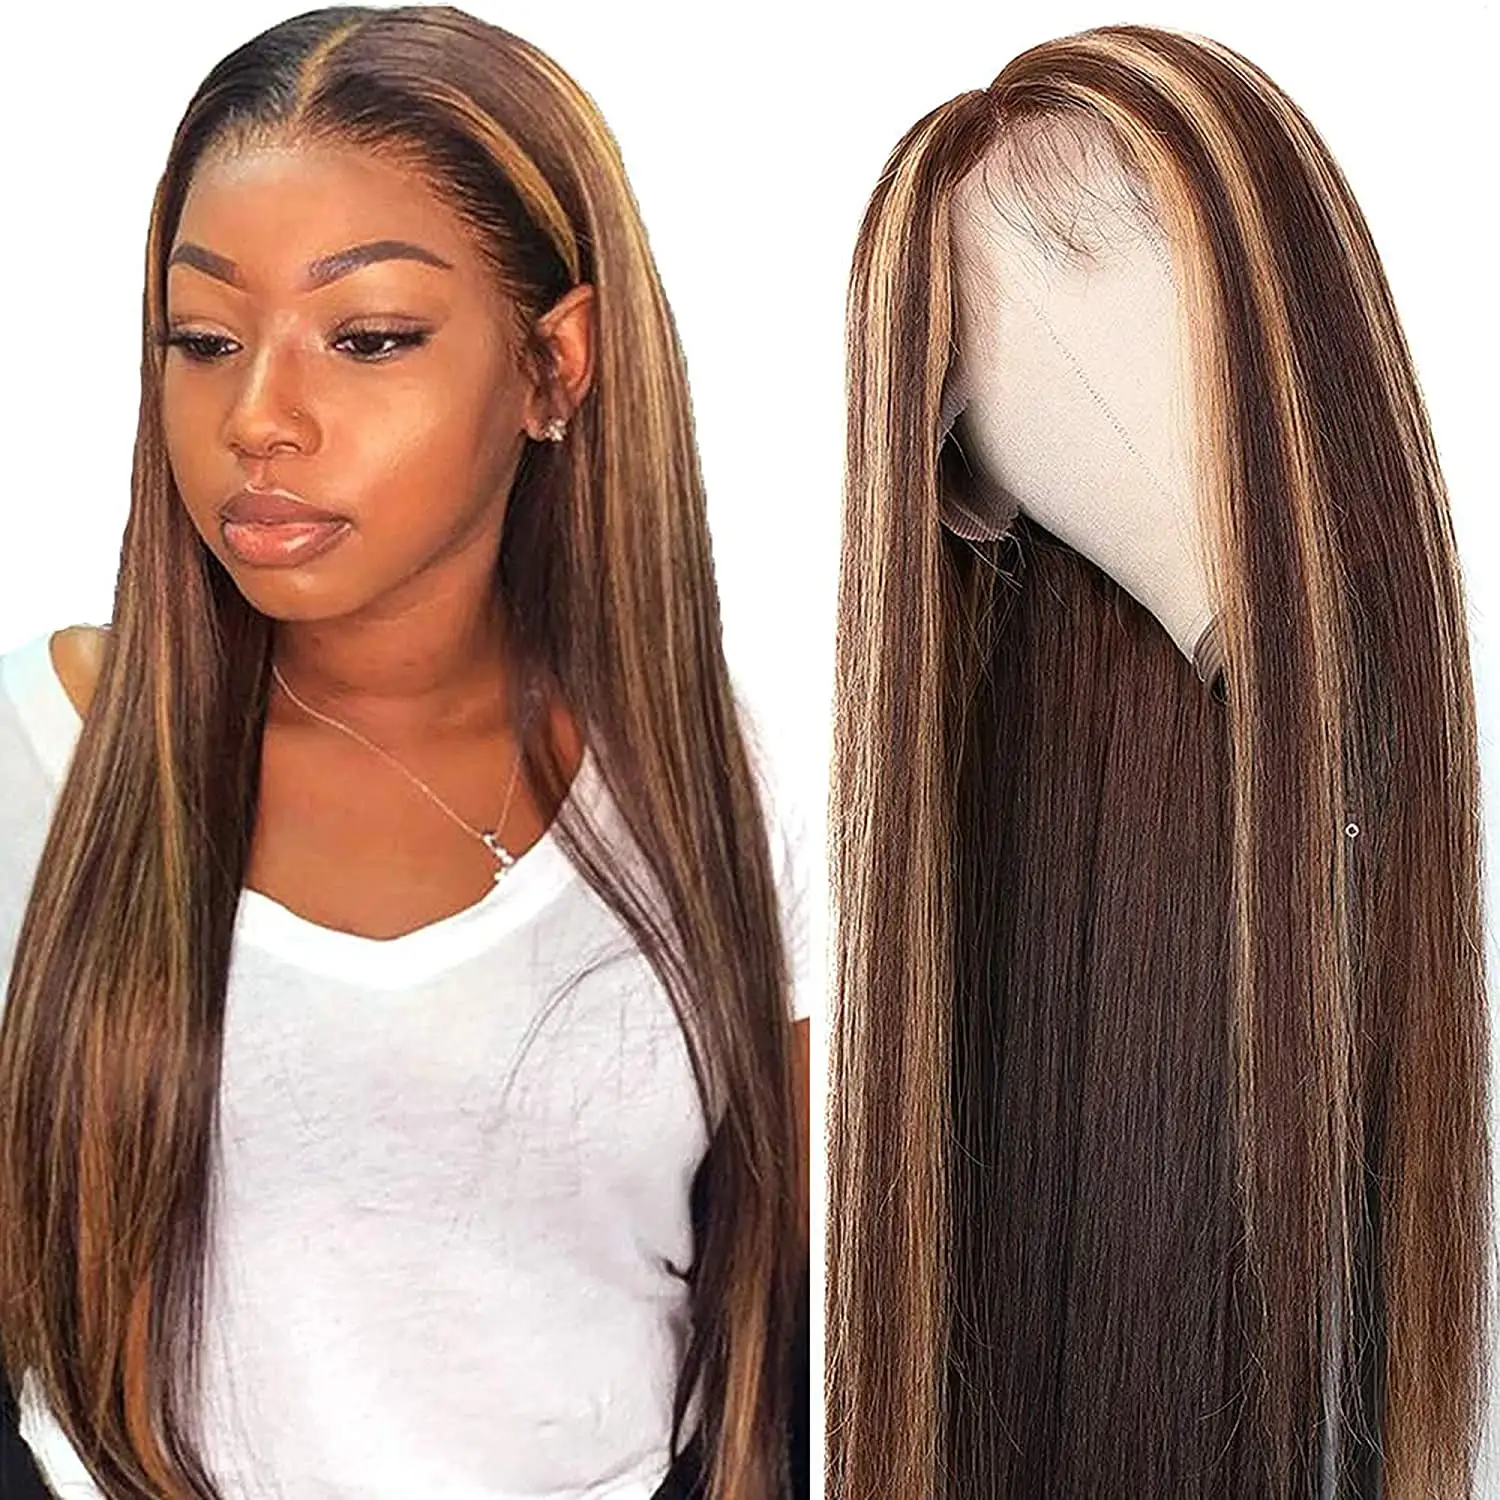 Brown Rooted Human Hair Wigs With Bangs Highlights Straight Highlighted Human Hair Full Lace Wigs Full Lace Wig Highlighted